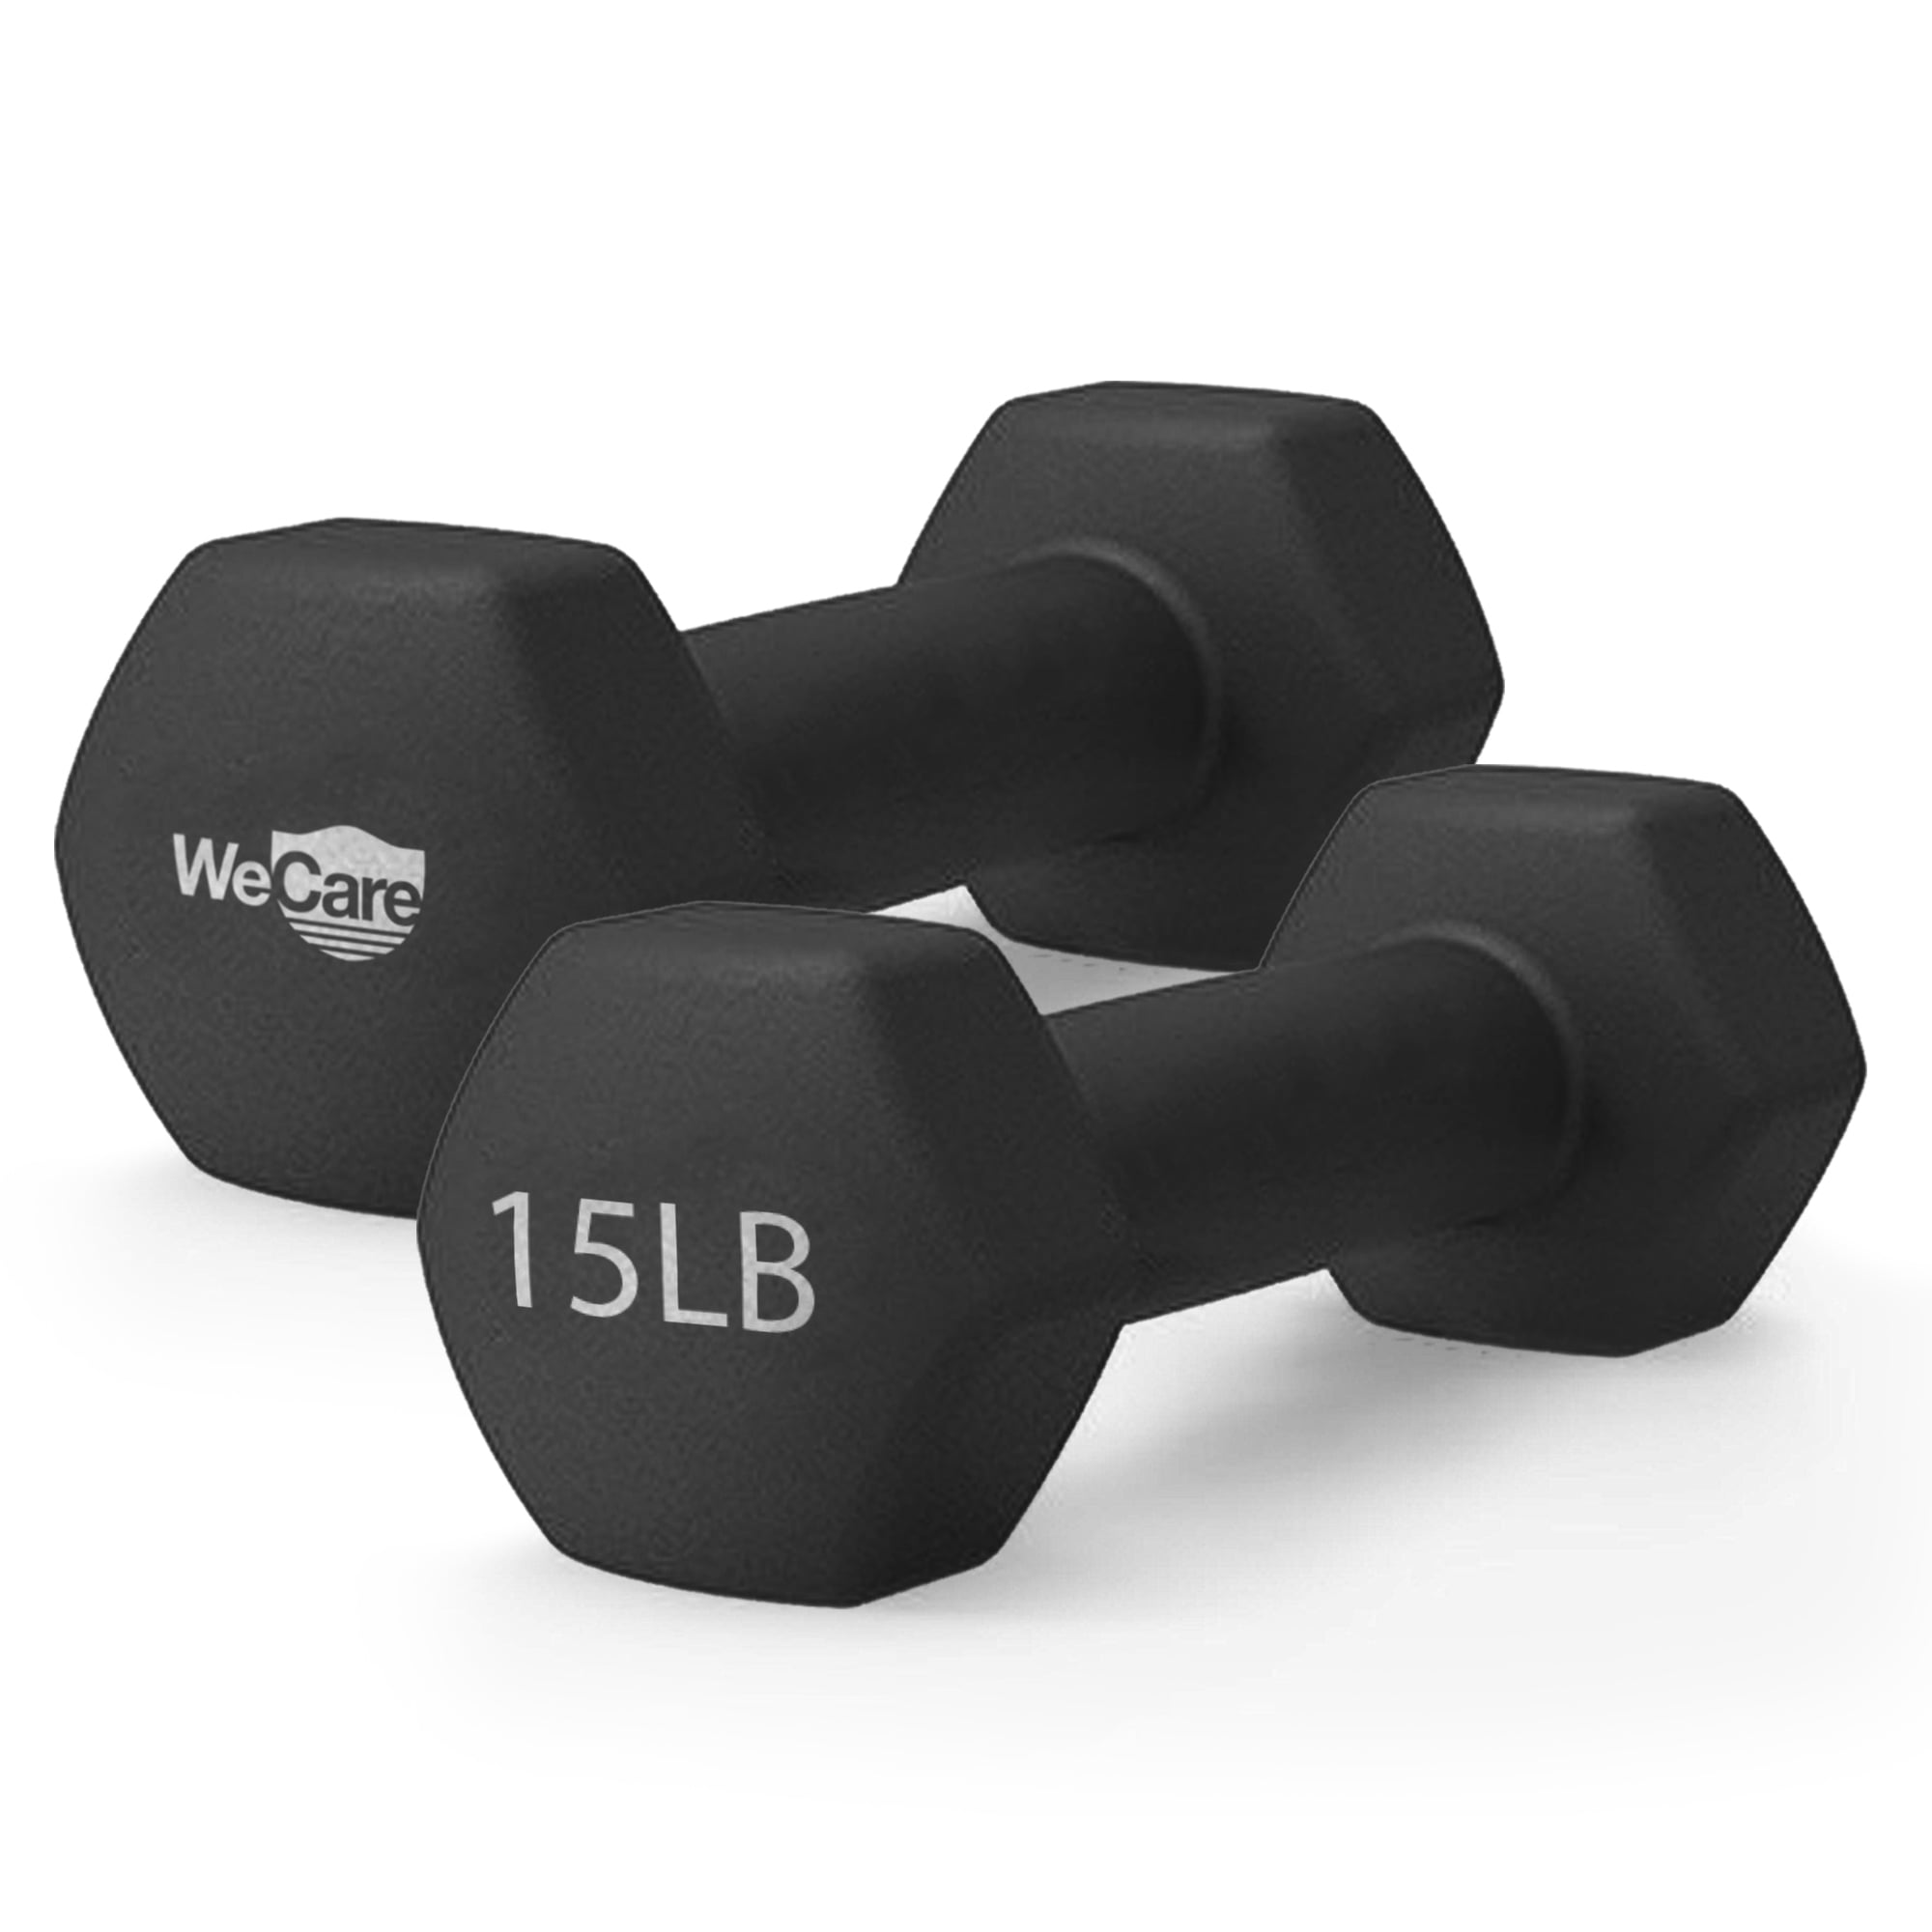 2LB Pair of Rubber Cap Neoprene Dumbbell Weights Fitness FAST FREE SHIPPING 